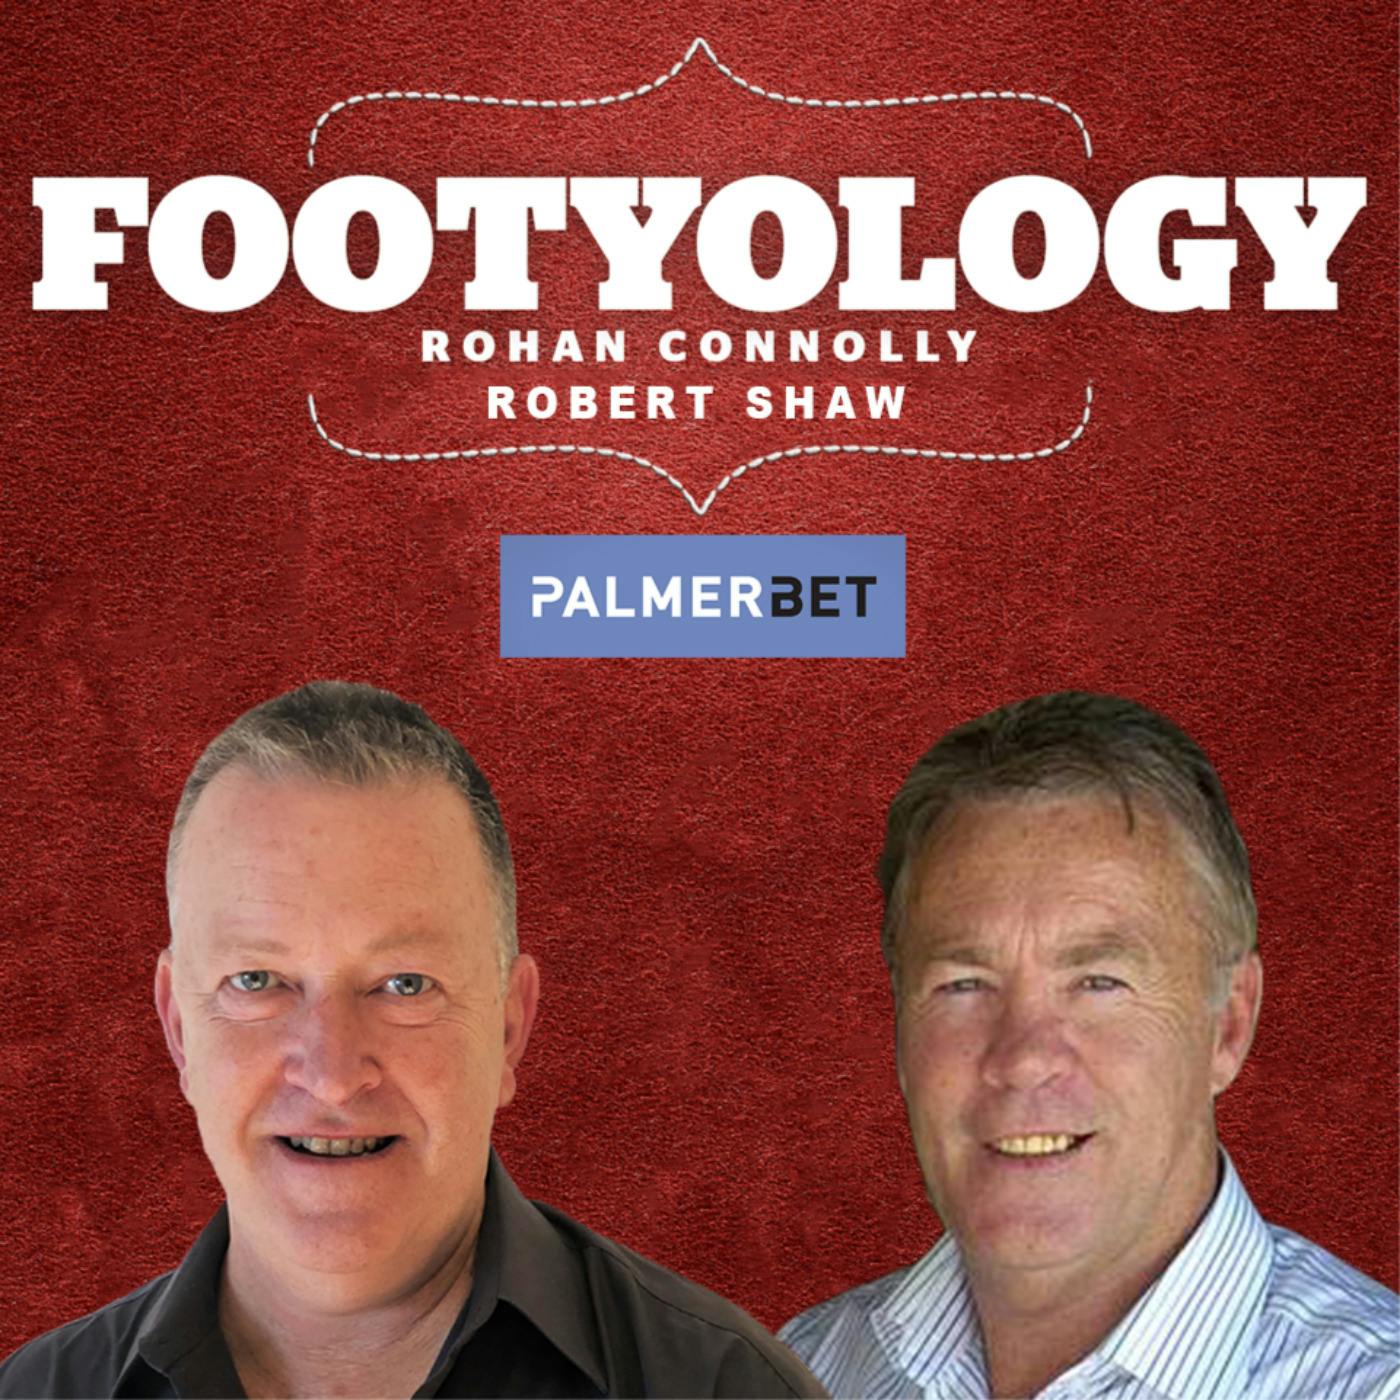 Footyology Podcast - March 9th 2022